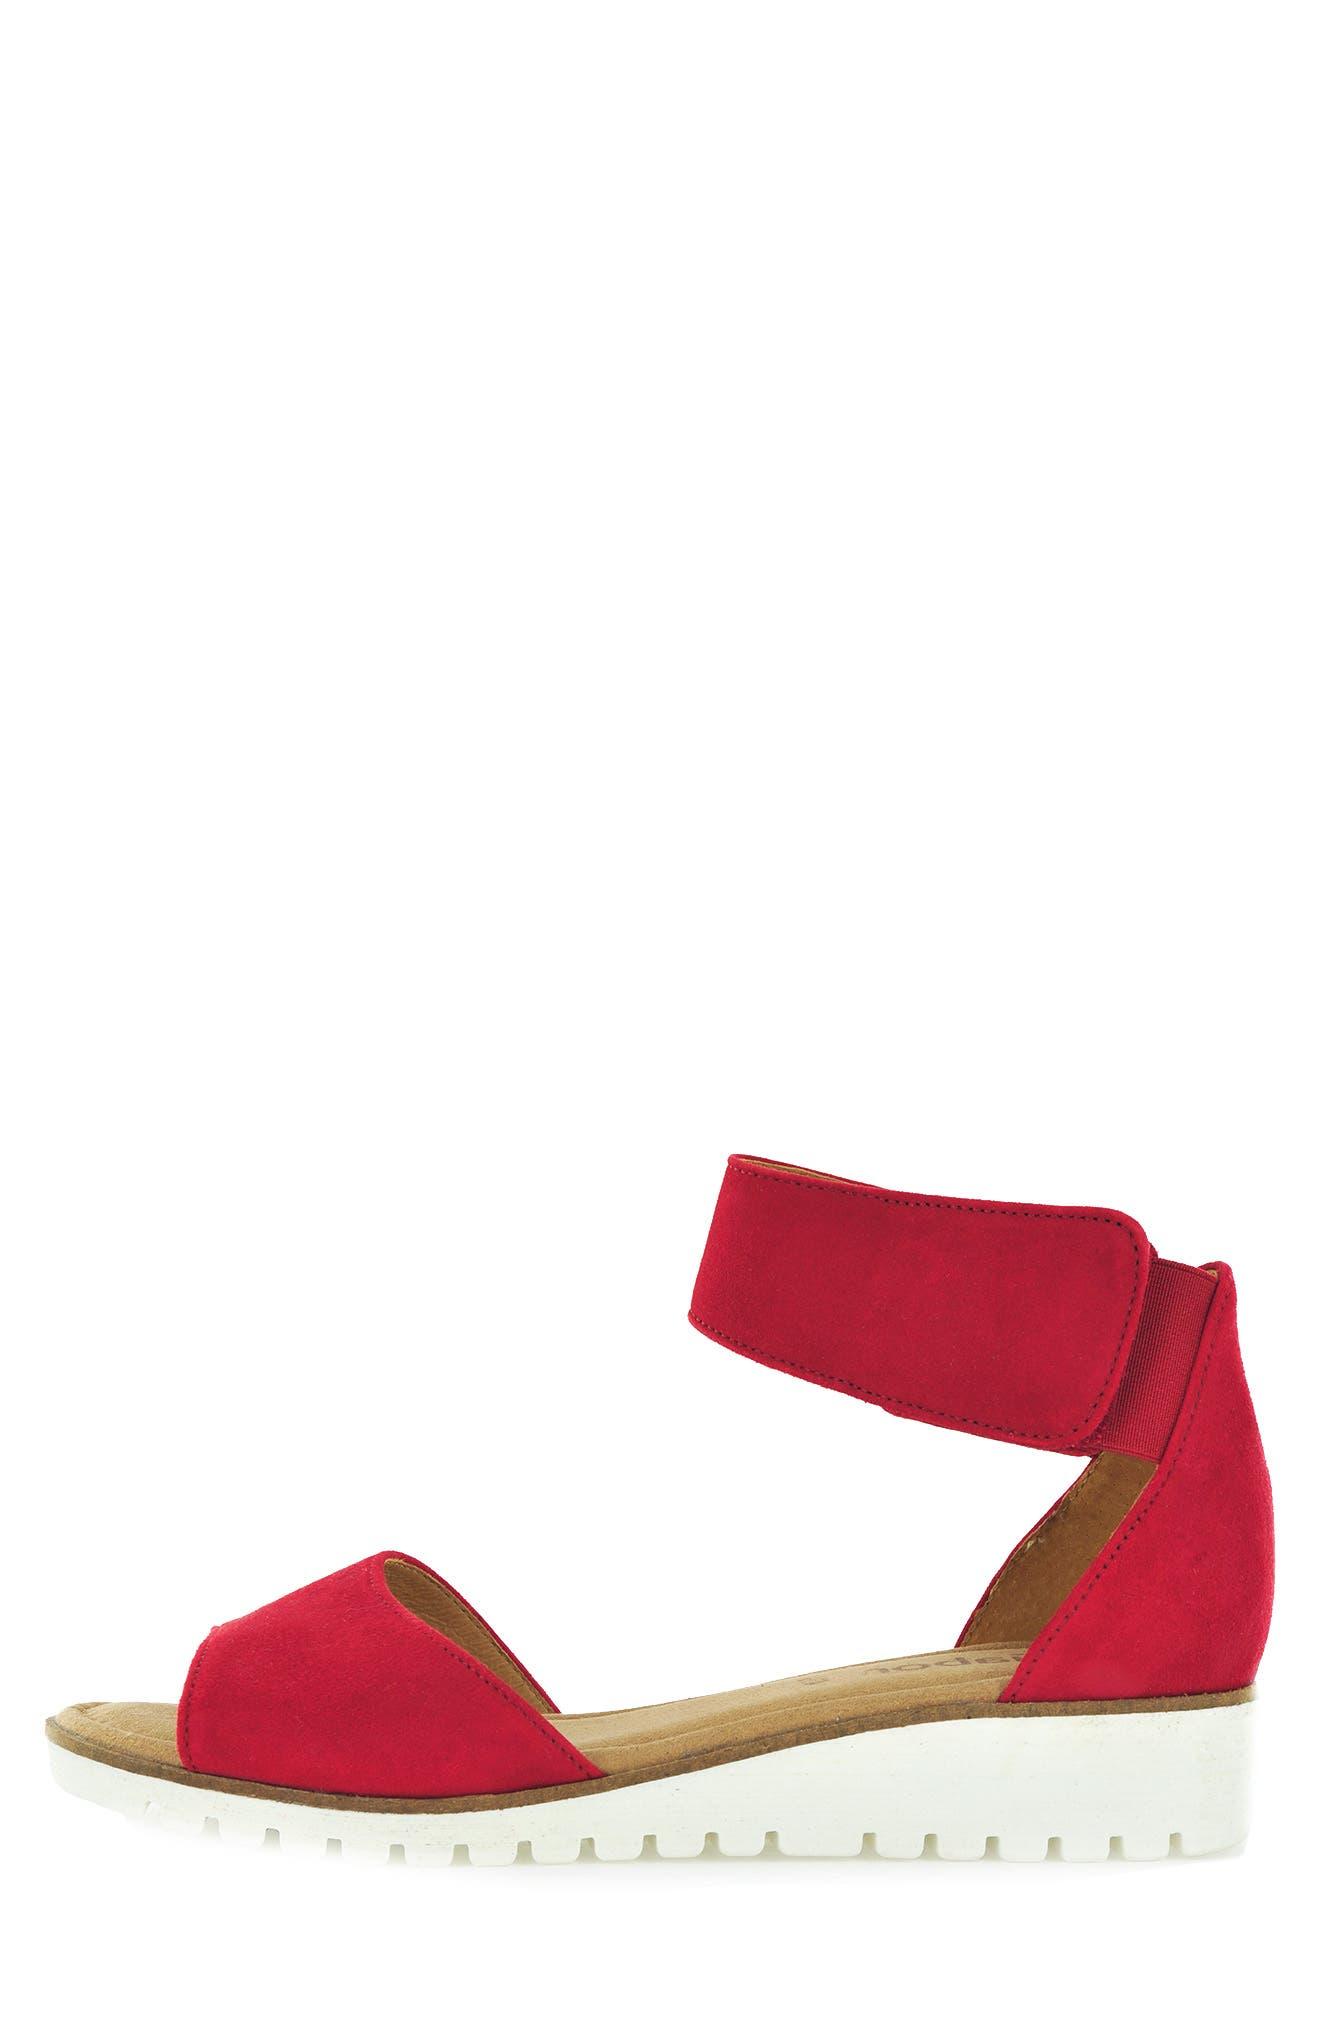 Gabor Strappy Wedge Sandal In Red At Nordstrom Rack | Lyst